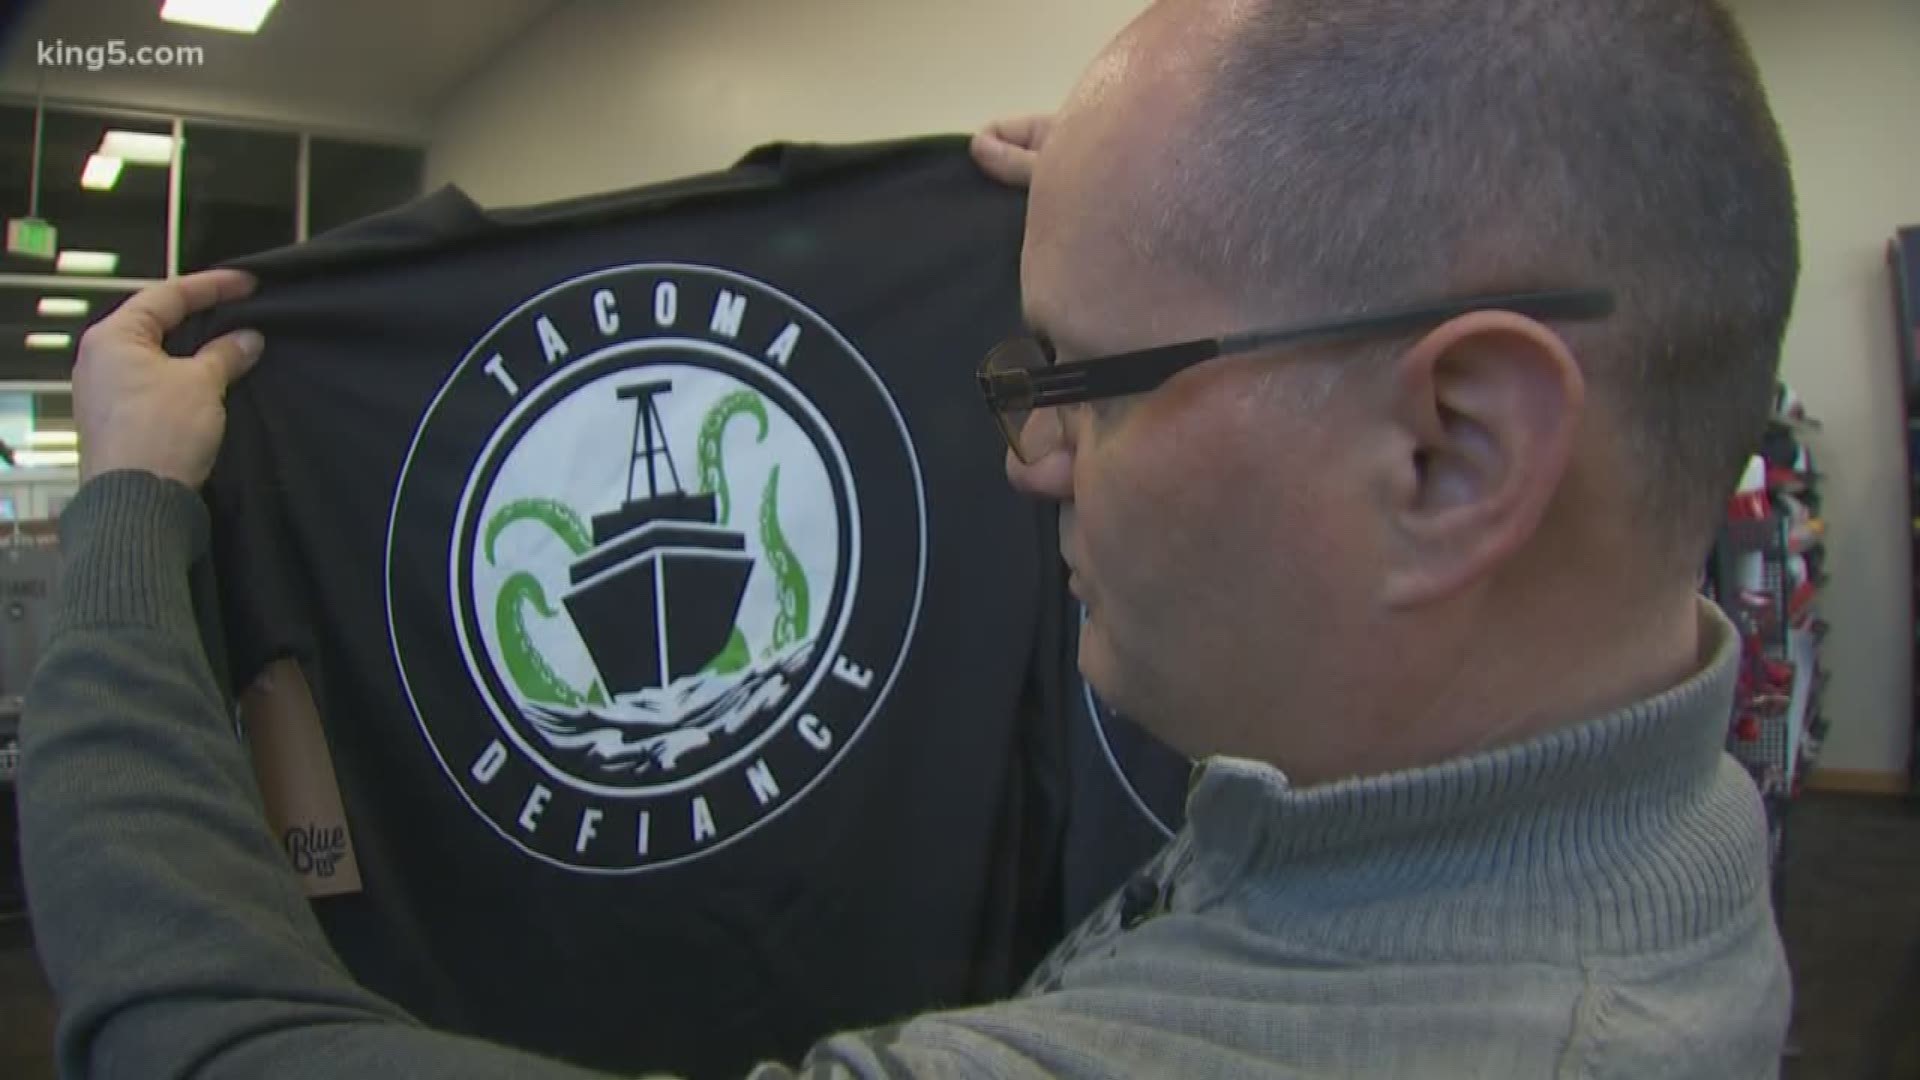 The Reign FC will soon call Tacoma home, and the Seattle Sounders' club team will now be called the Tacoma Defiance. KING 5's Michael Crowe reports.